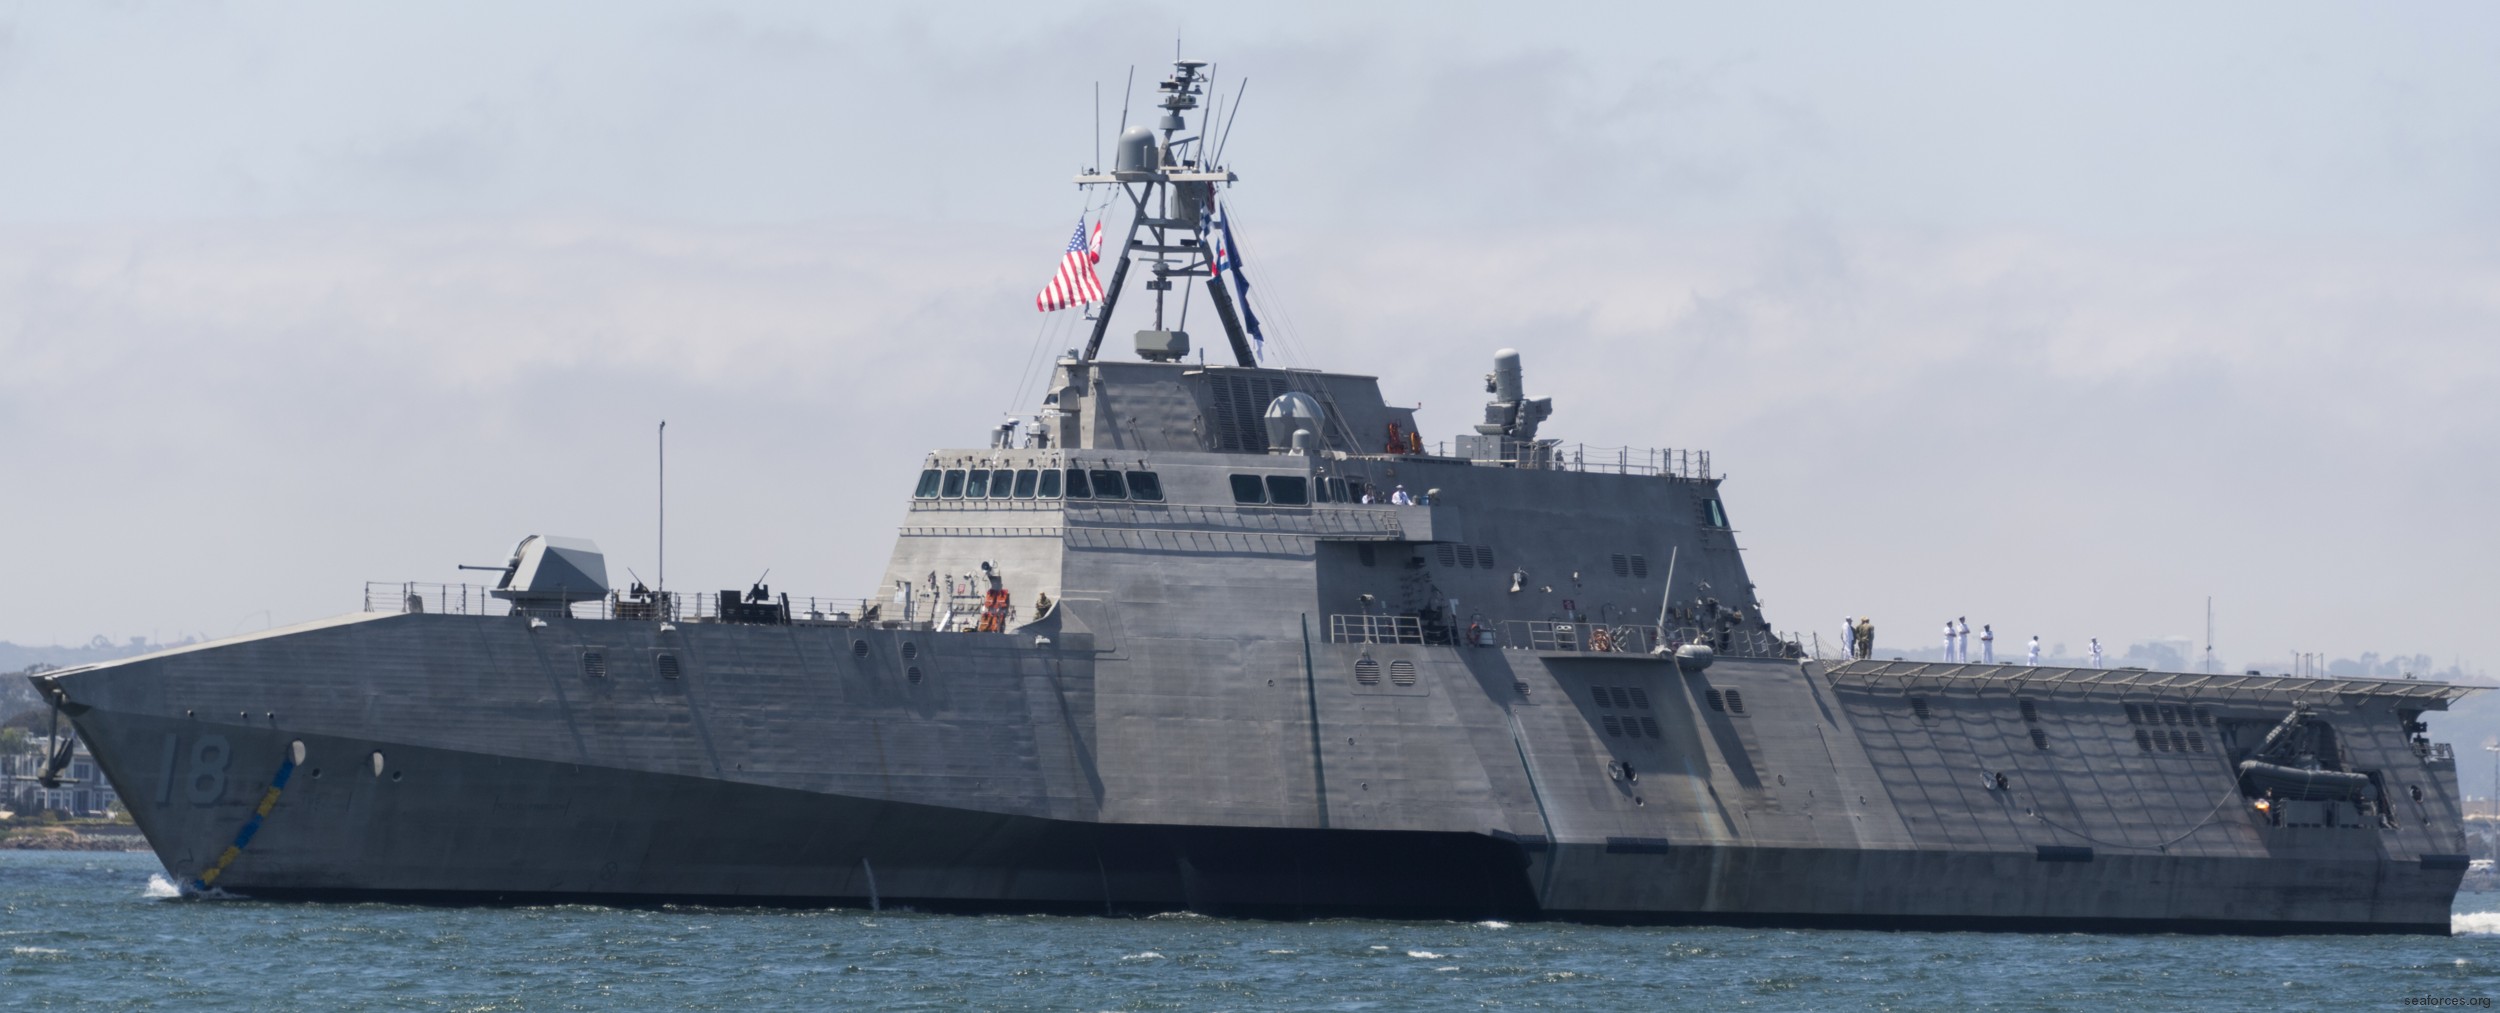 lcs-18 uss charleston littoral combat ship independence class us navy 04 san diego california homeport